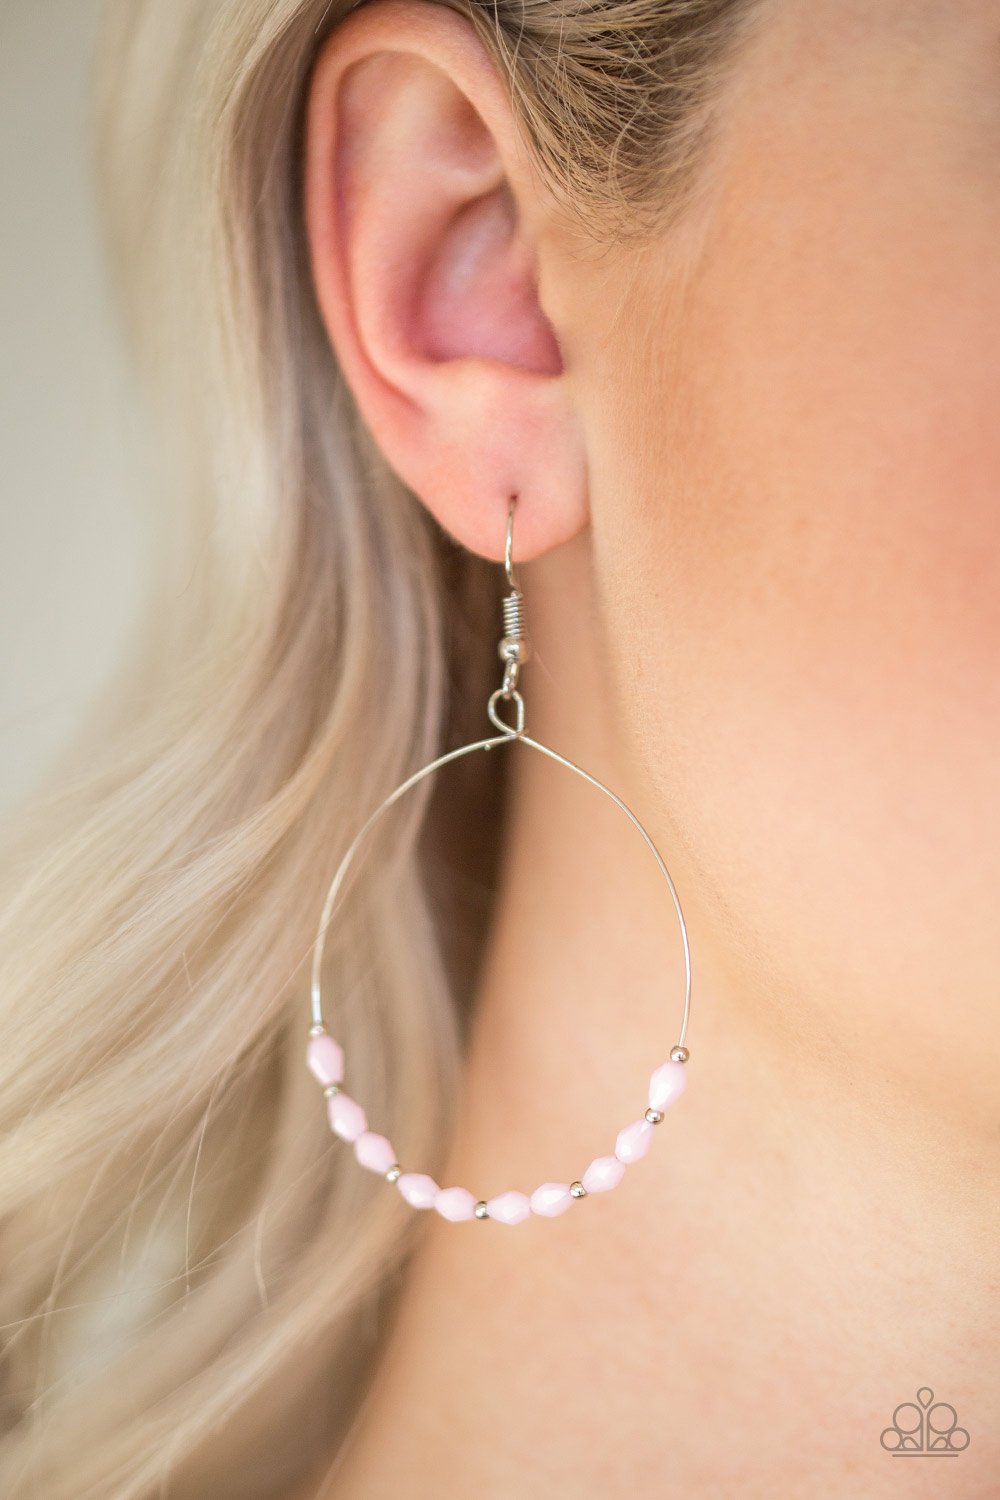 Prize Winning Sparkle Pink Earring